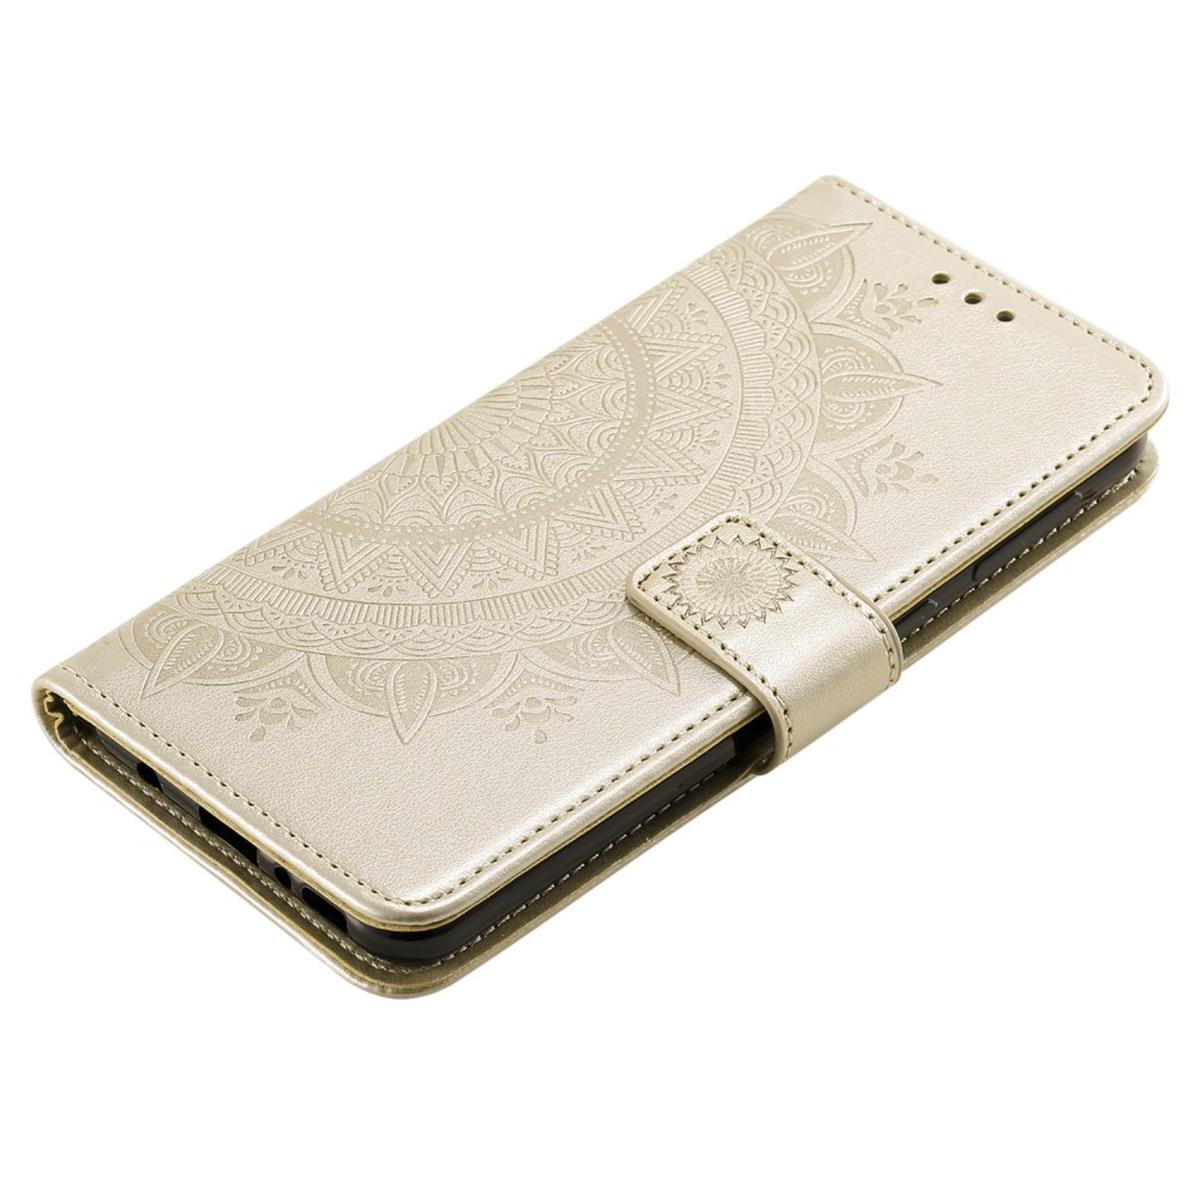 P COVERKINGZ Muster, mit Mandala Smart Gold Bookcover, Huawei, Klapphülle 2020,